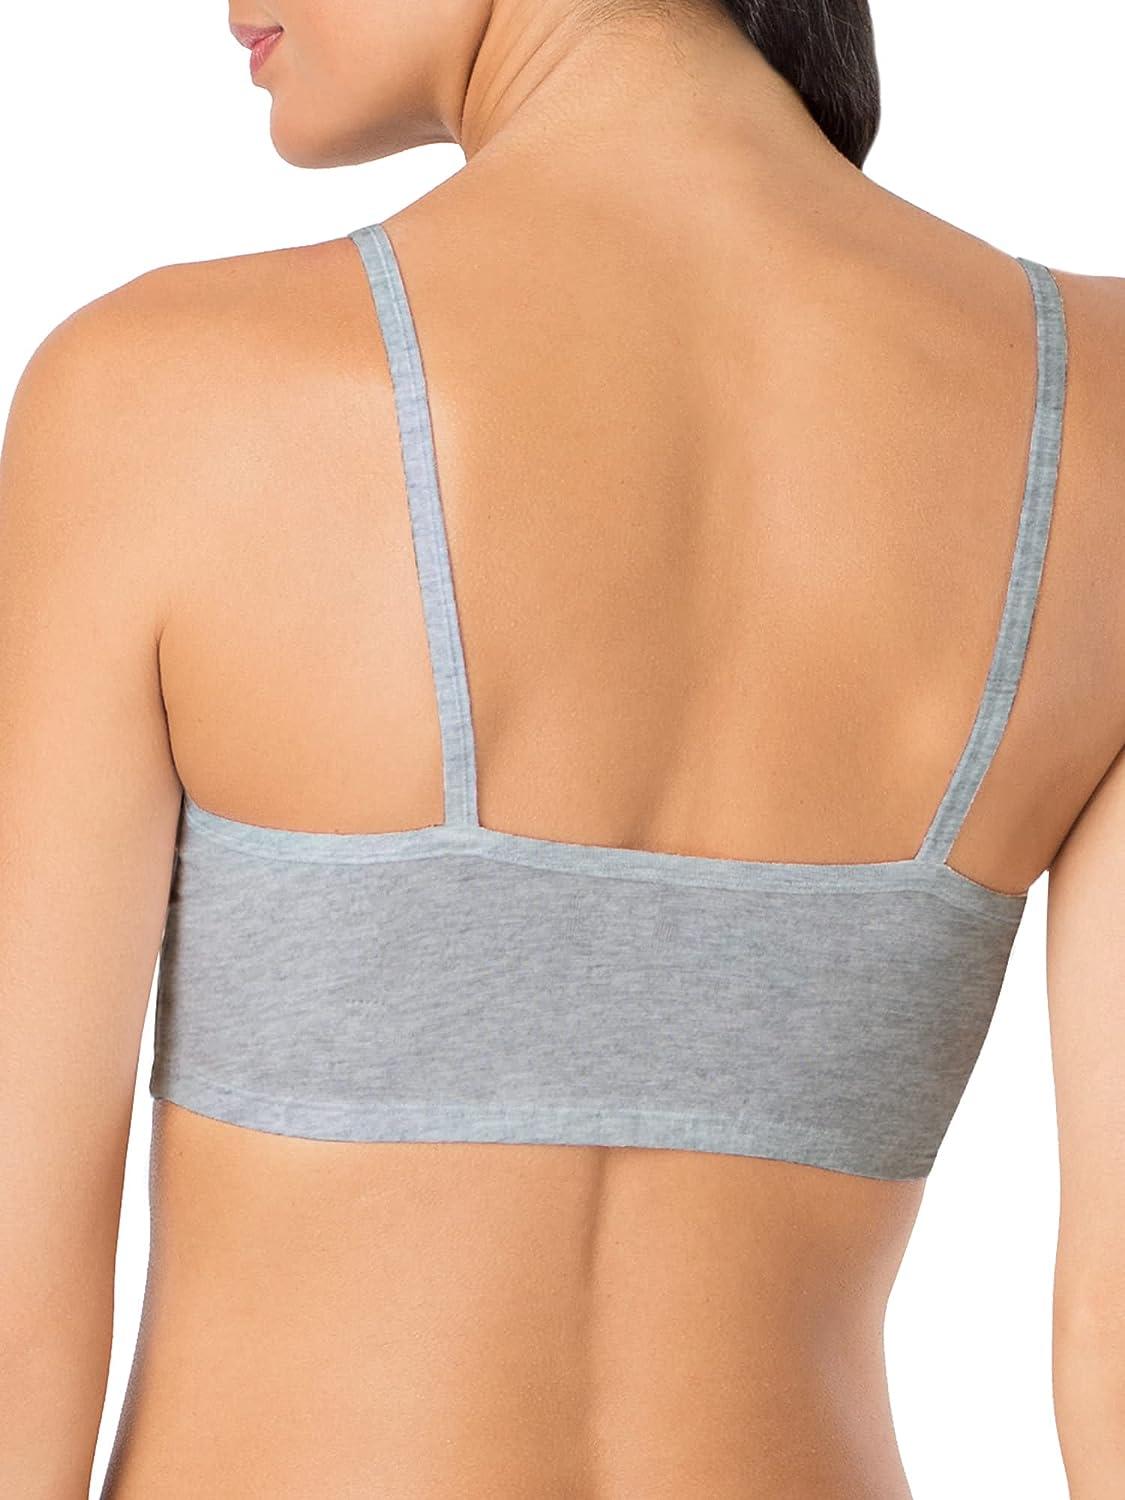 NWT Fruit of the Loom womens Spaghetti strap Pullover Sports Bra 3